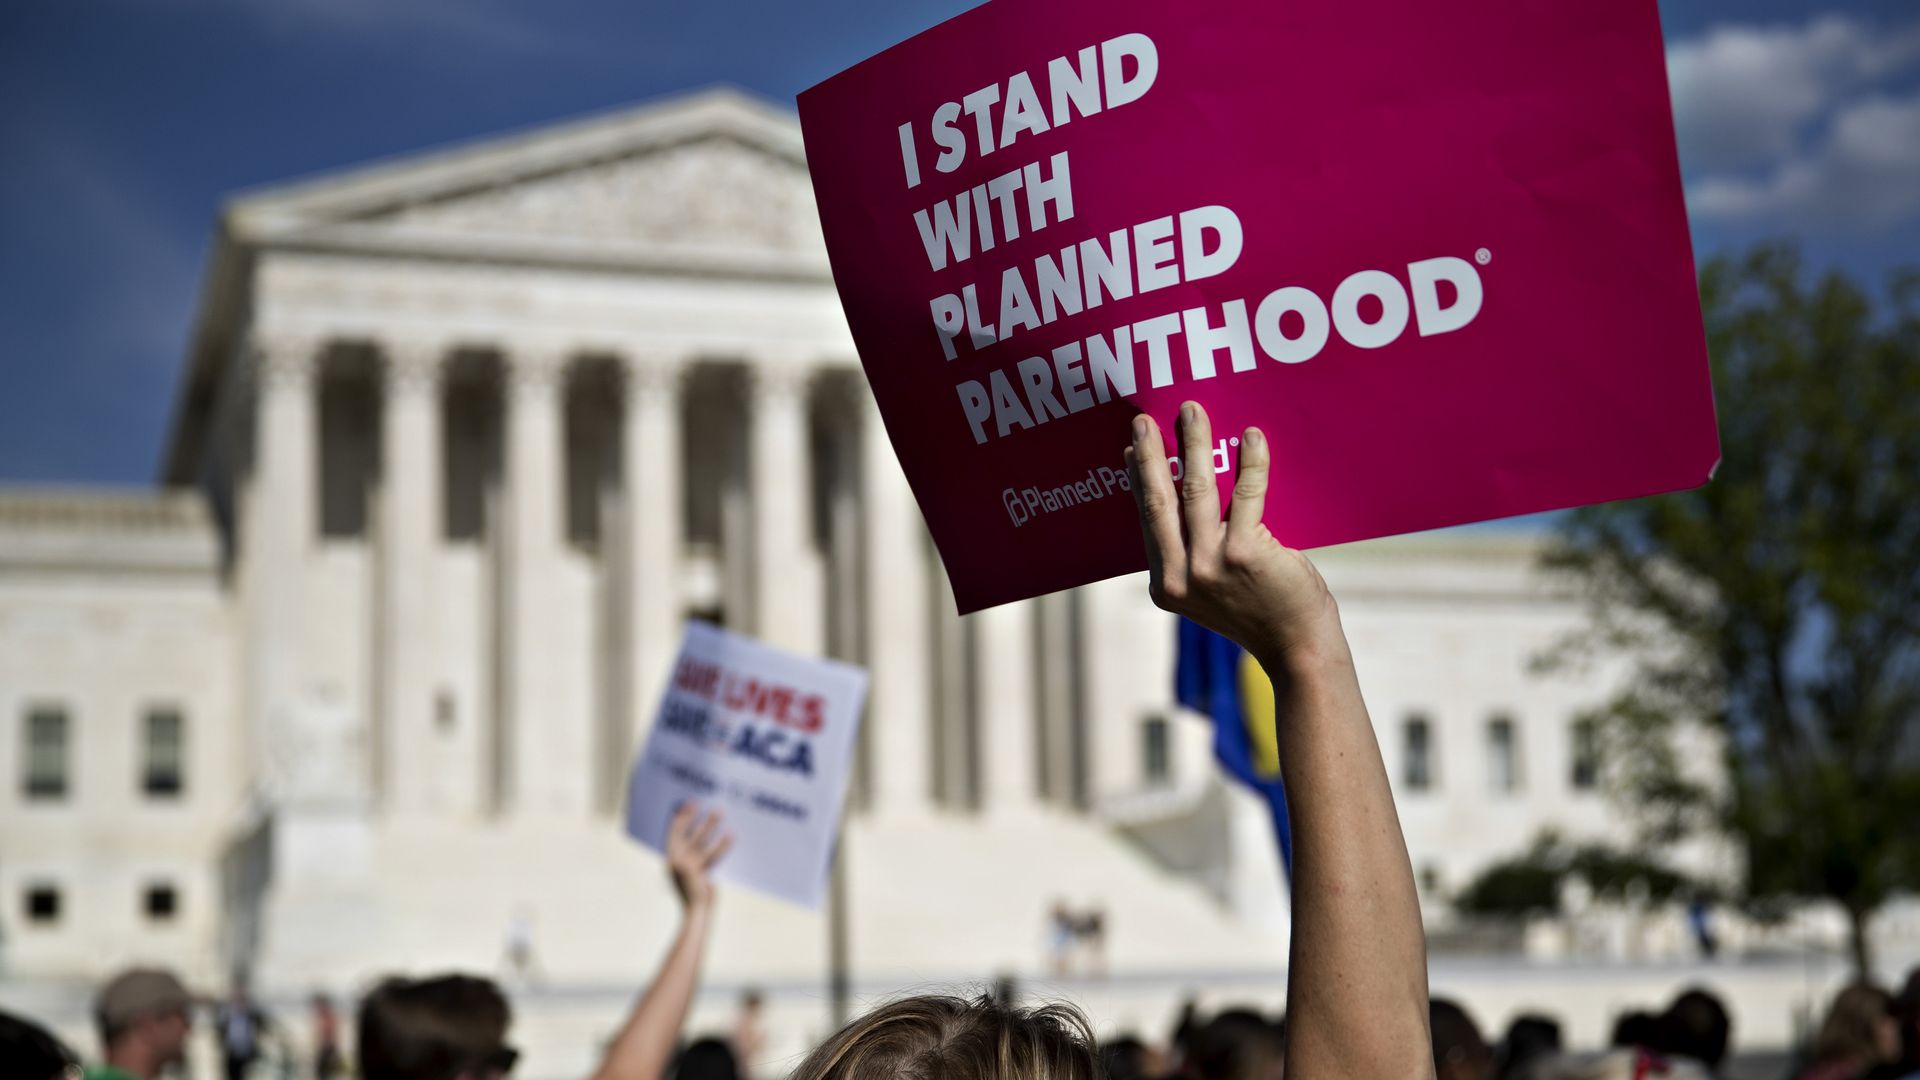 Picture of a hand holding a pink sign that says "I stand with Planned Parenthood" in an abortion rights protest happening in front of the U.S. Supreme Court